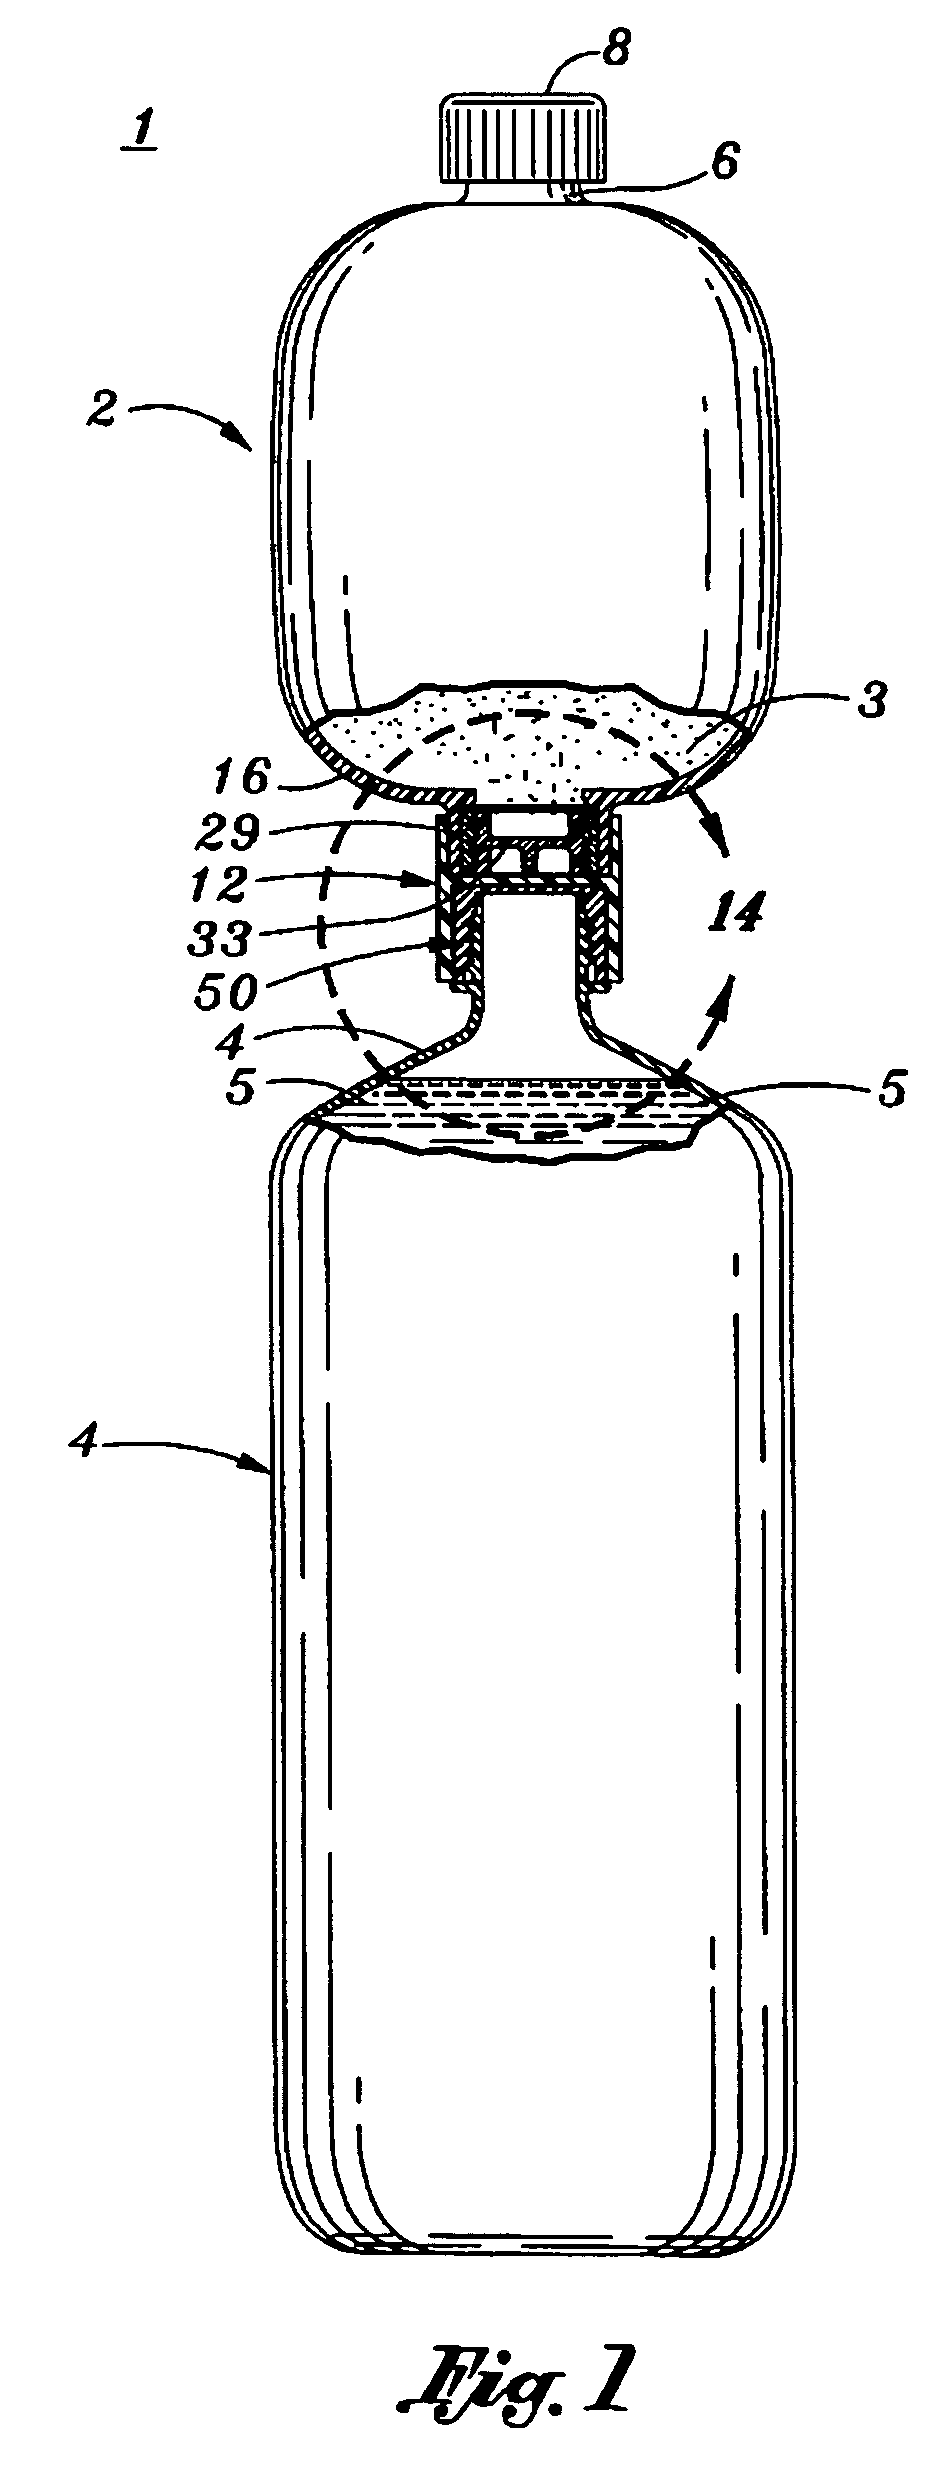 Packaging system for storing and mixing separate ingredient components